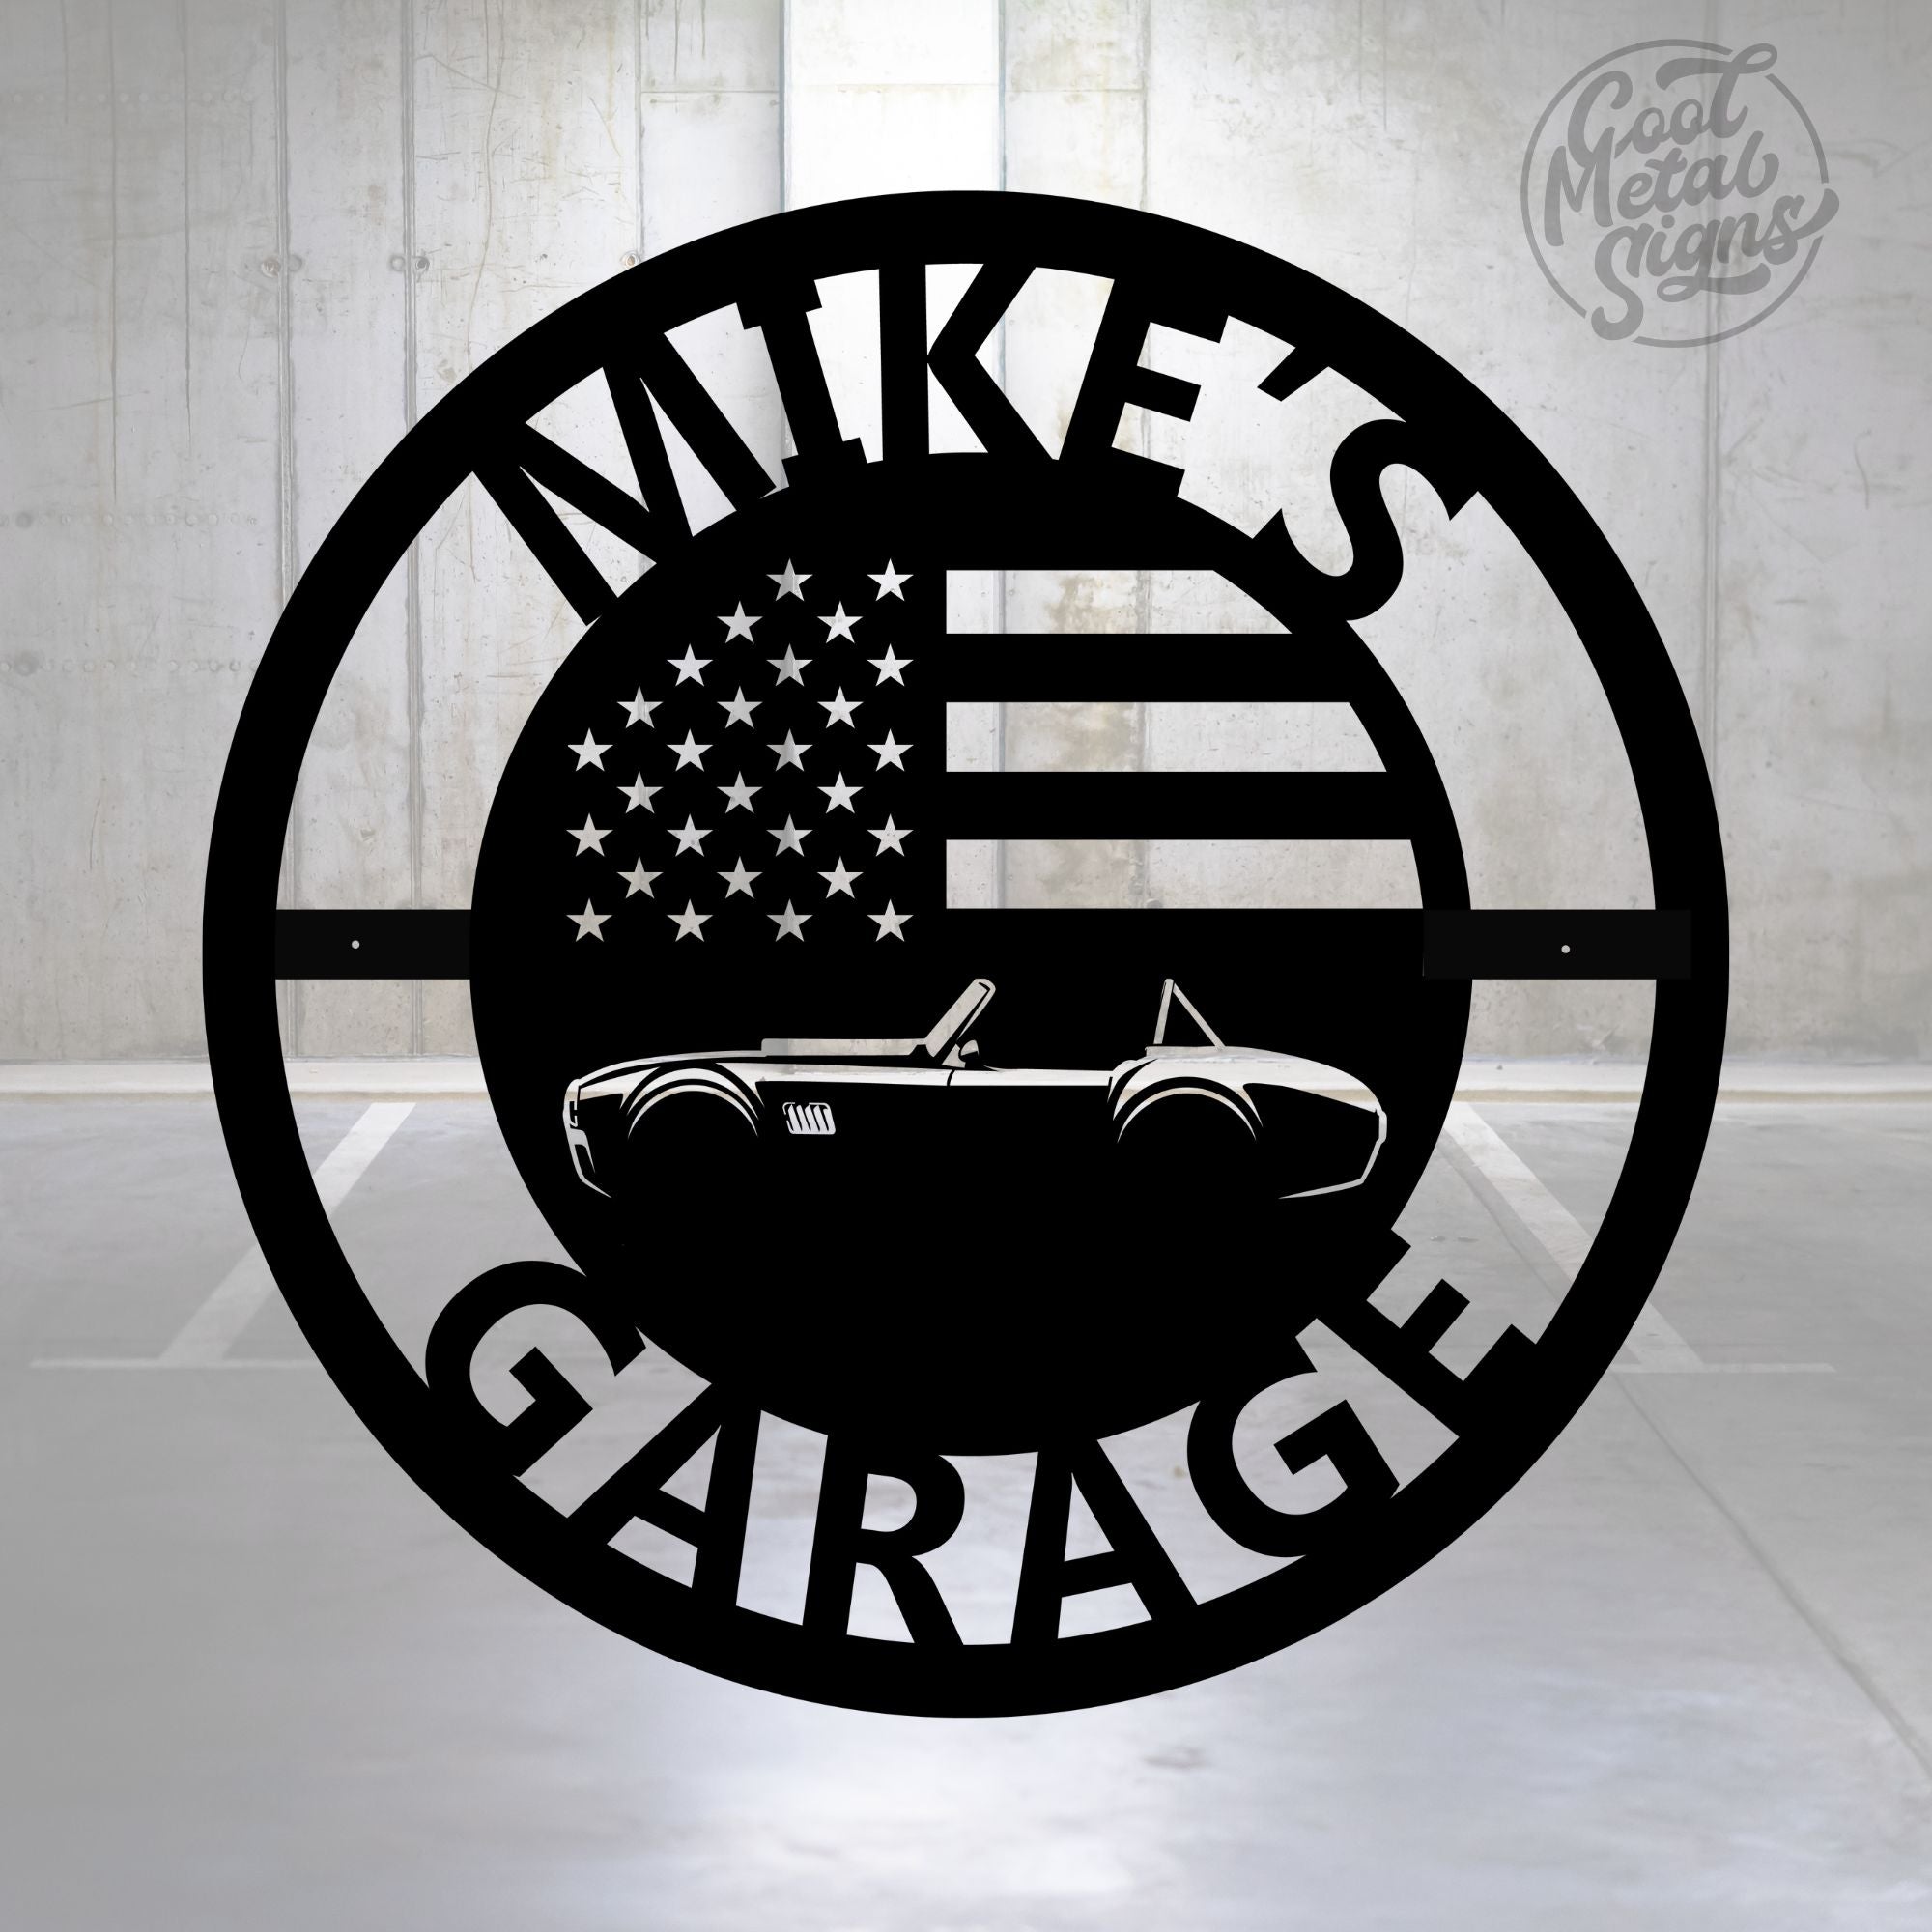 Personalized Shelby Cobra Garage Sign - Cool Metal Signs